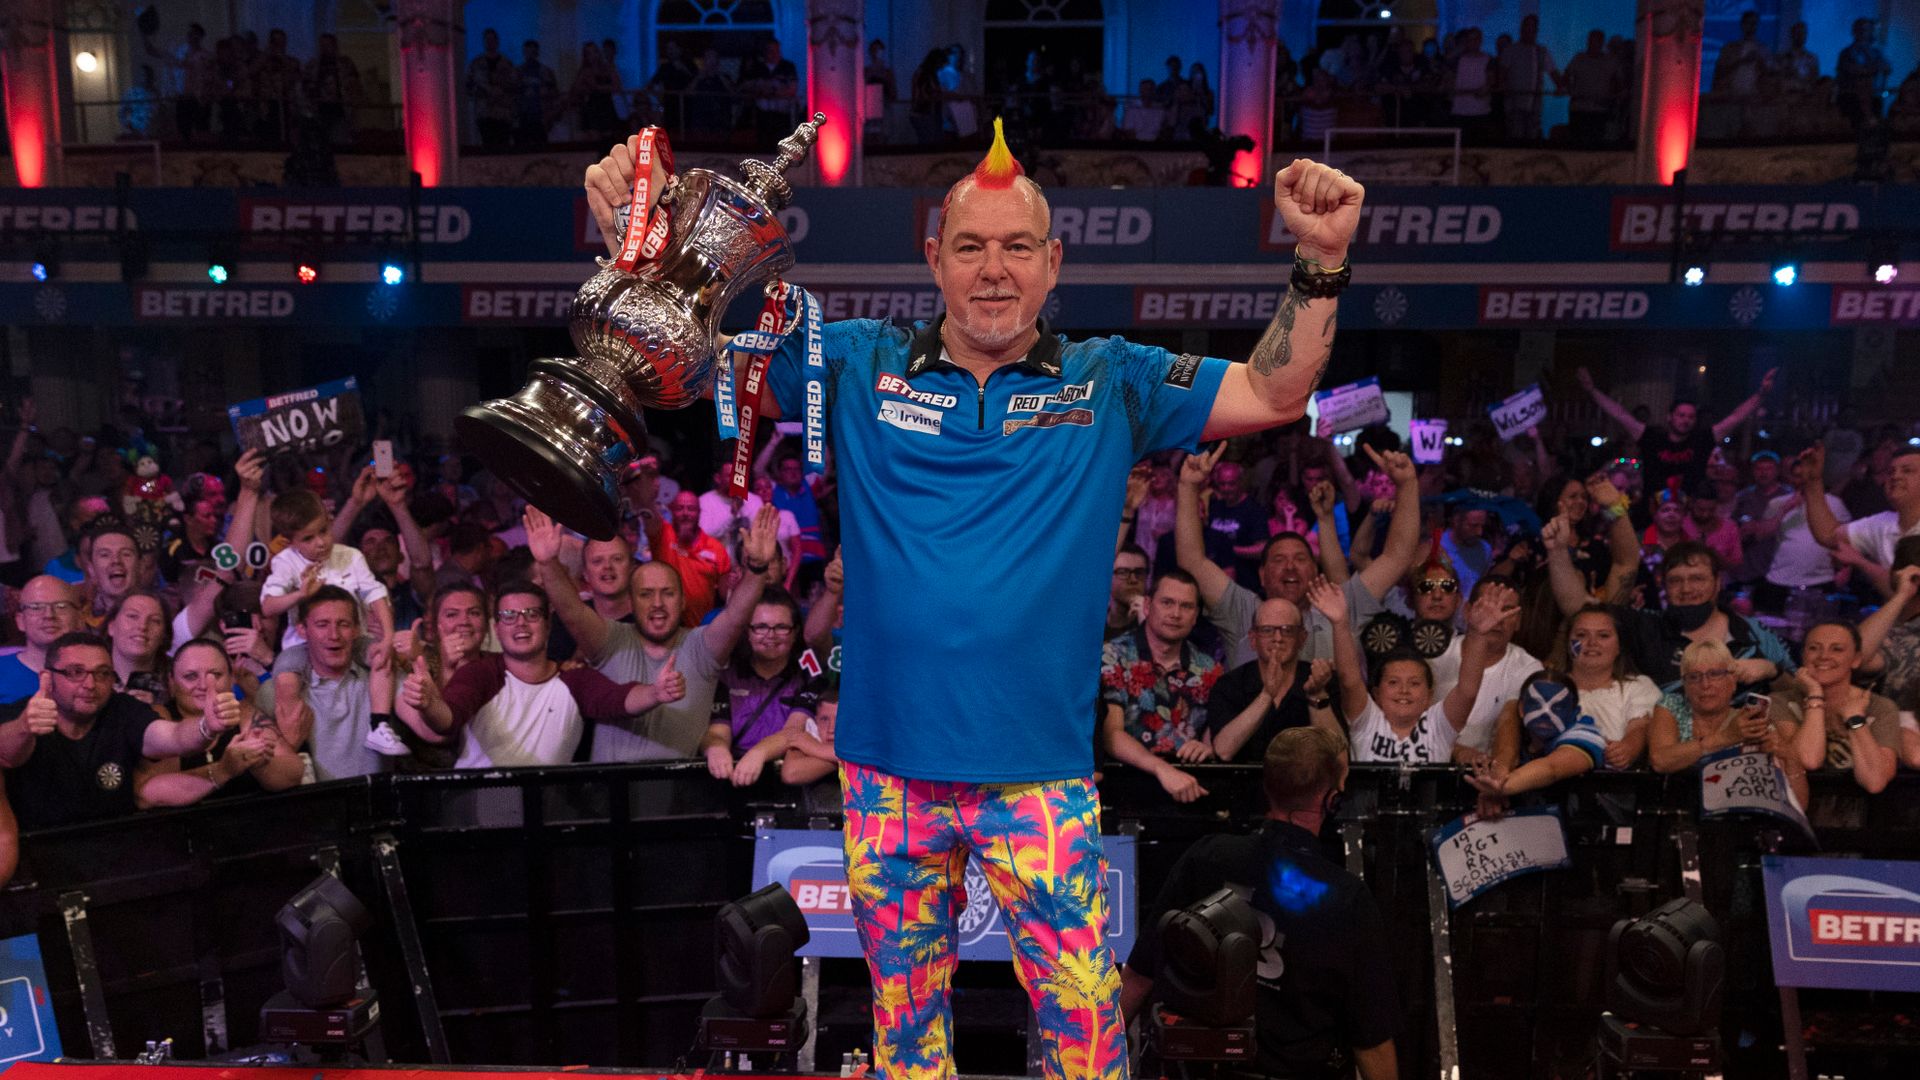 Sensational Snakebite claims Matchplay crown